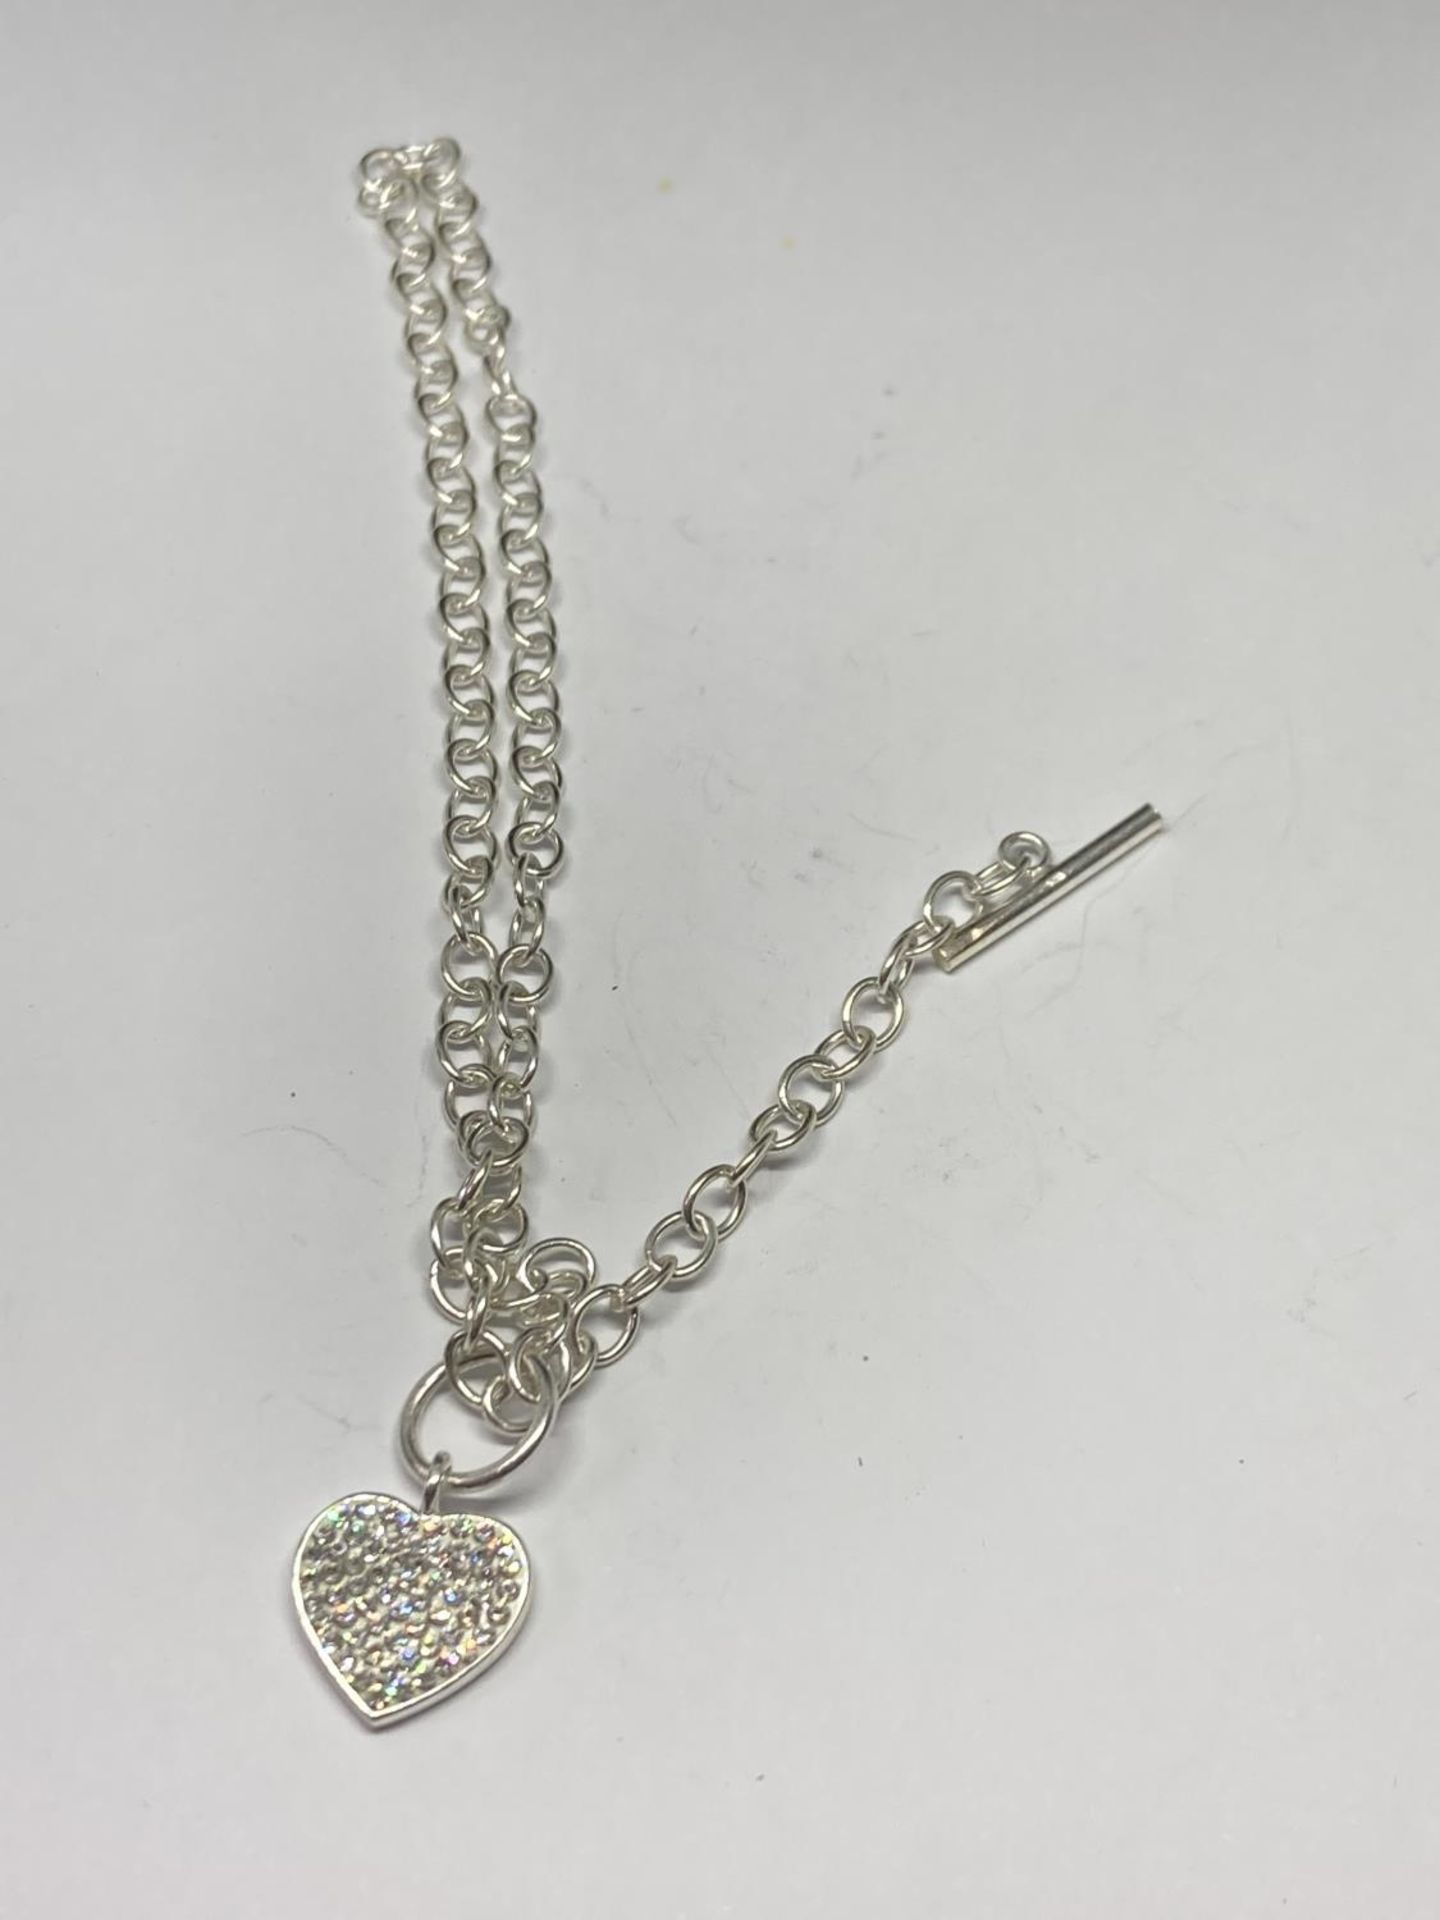 A SILVER T BAR NECKLACE WITH HEART CHARM LENGTH 18"